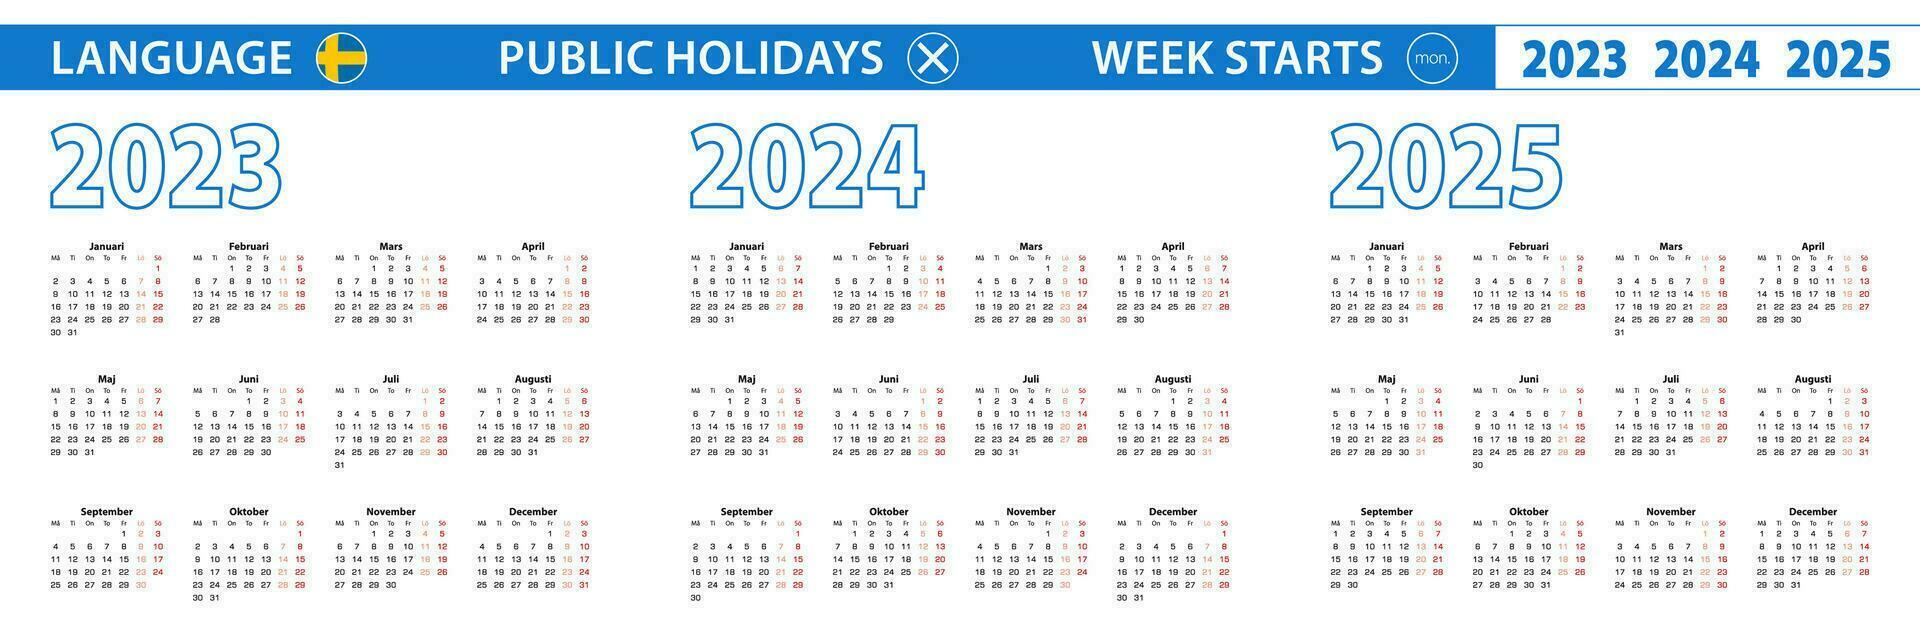 Simple calendar template in Swedish for 2023, 2024, 2025 years. Week starts from Monday. vector